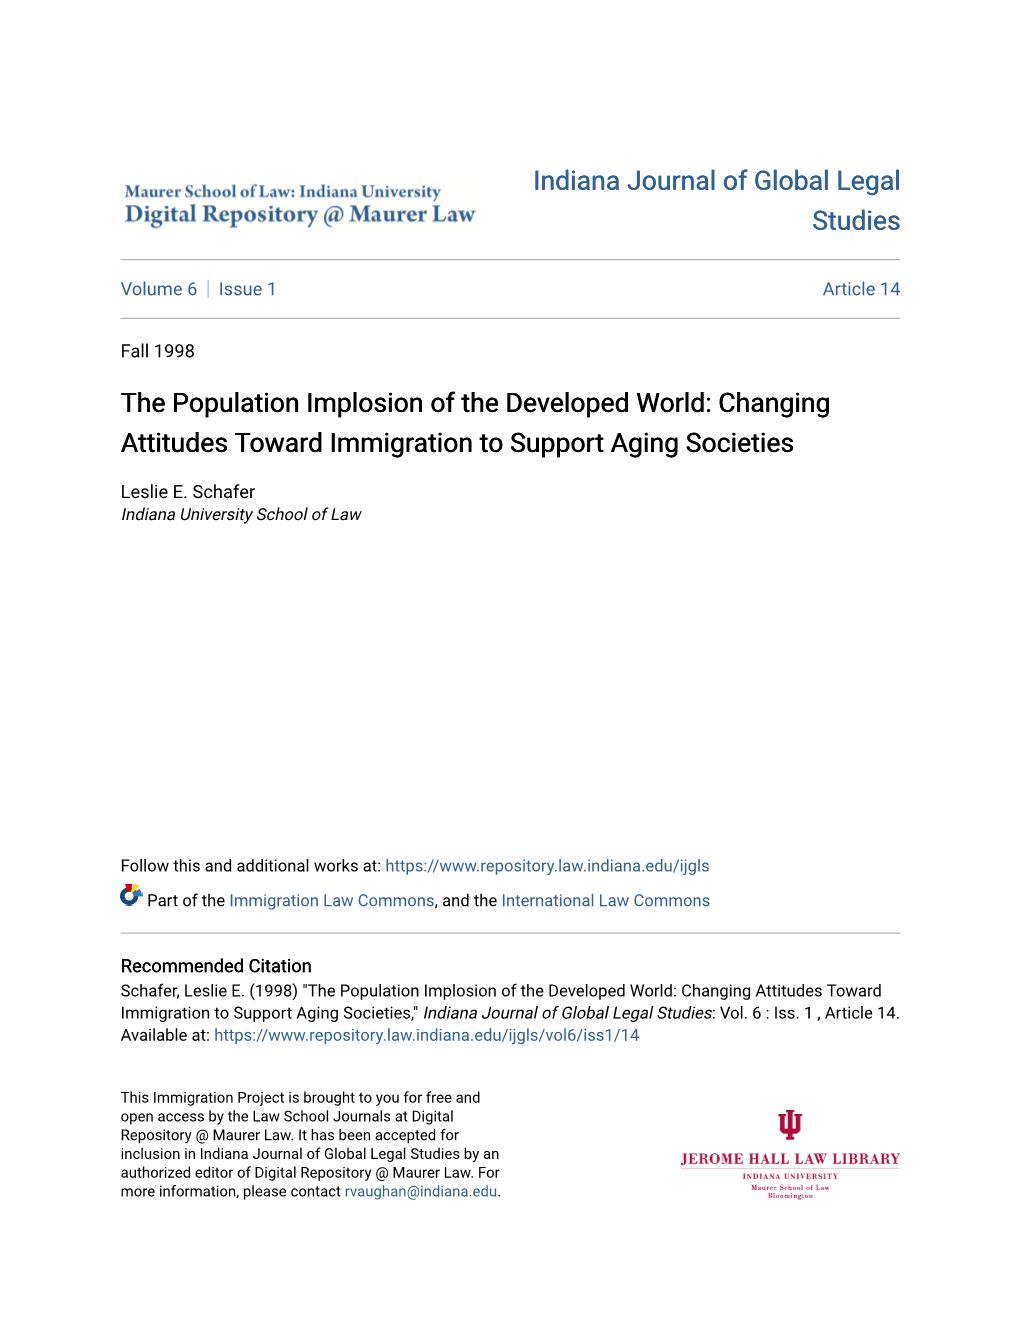 The Population Implosion of the Developed World: Changing Attitudes Toward Immigration to Support Aging Societies